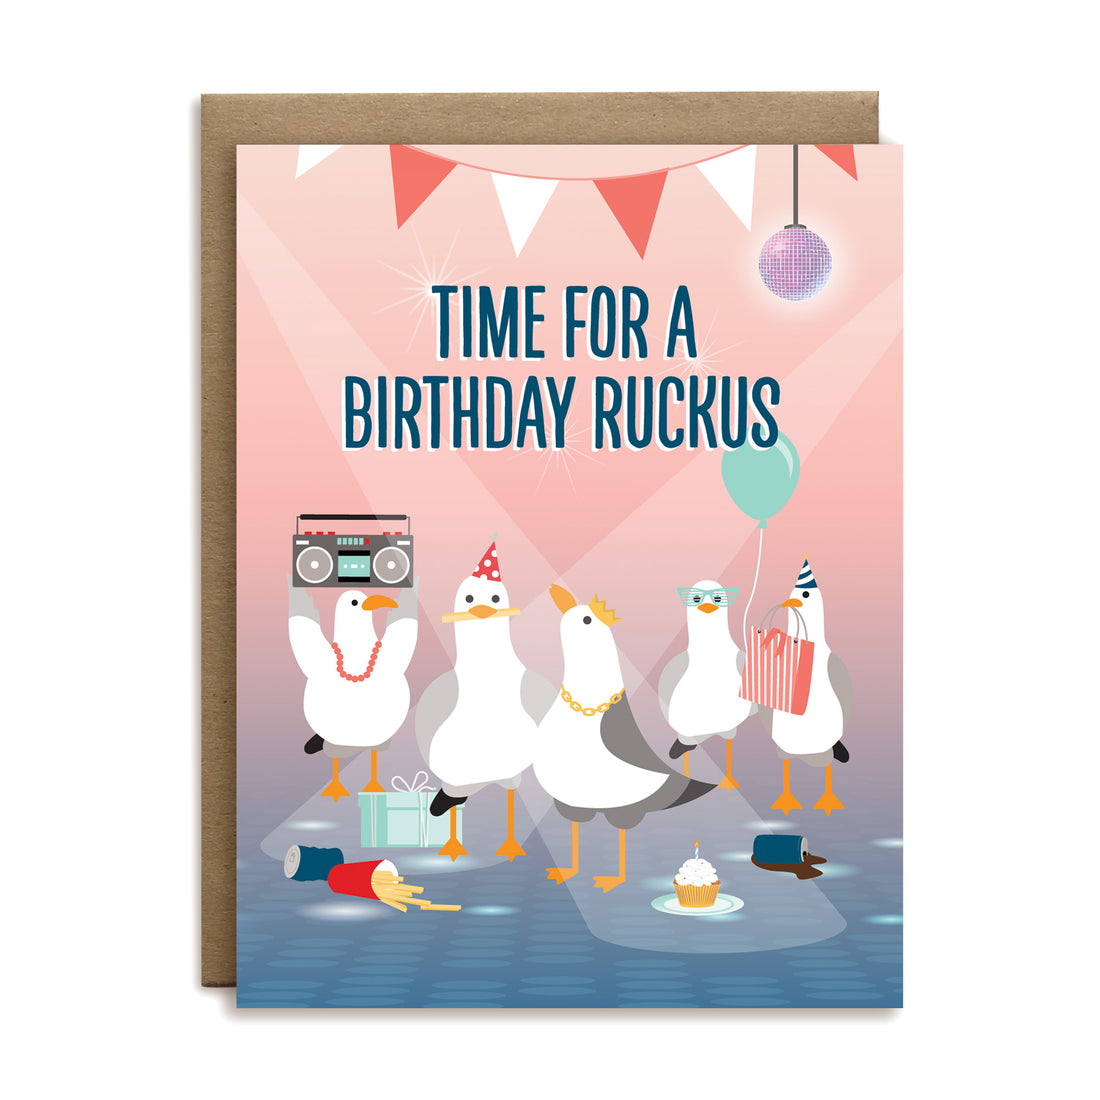 Time for a birthday ruckus seagull birthday greeting card by I&